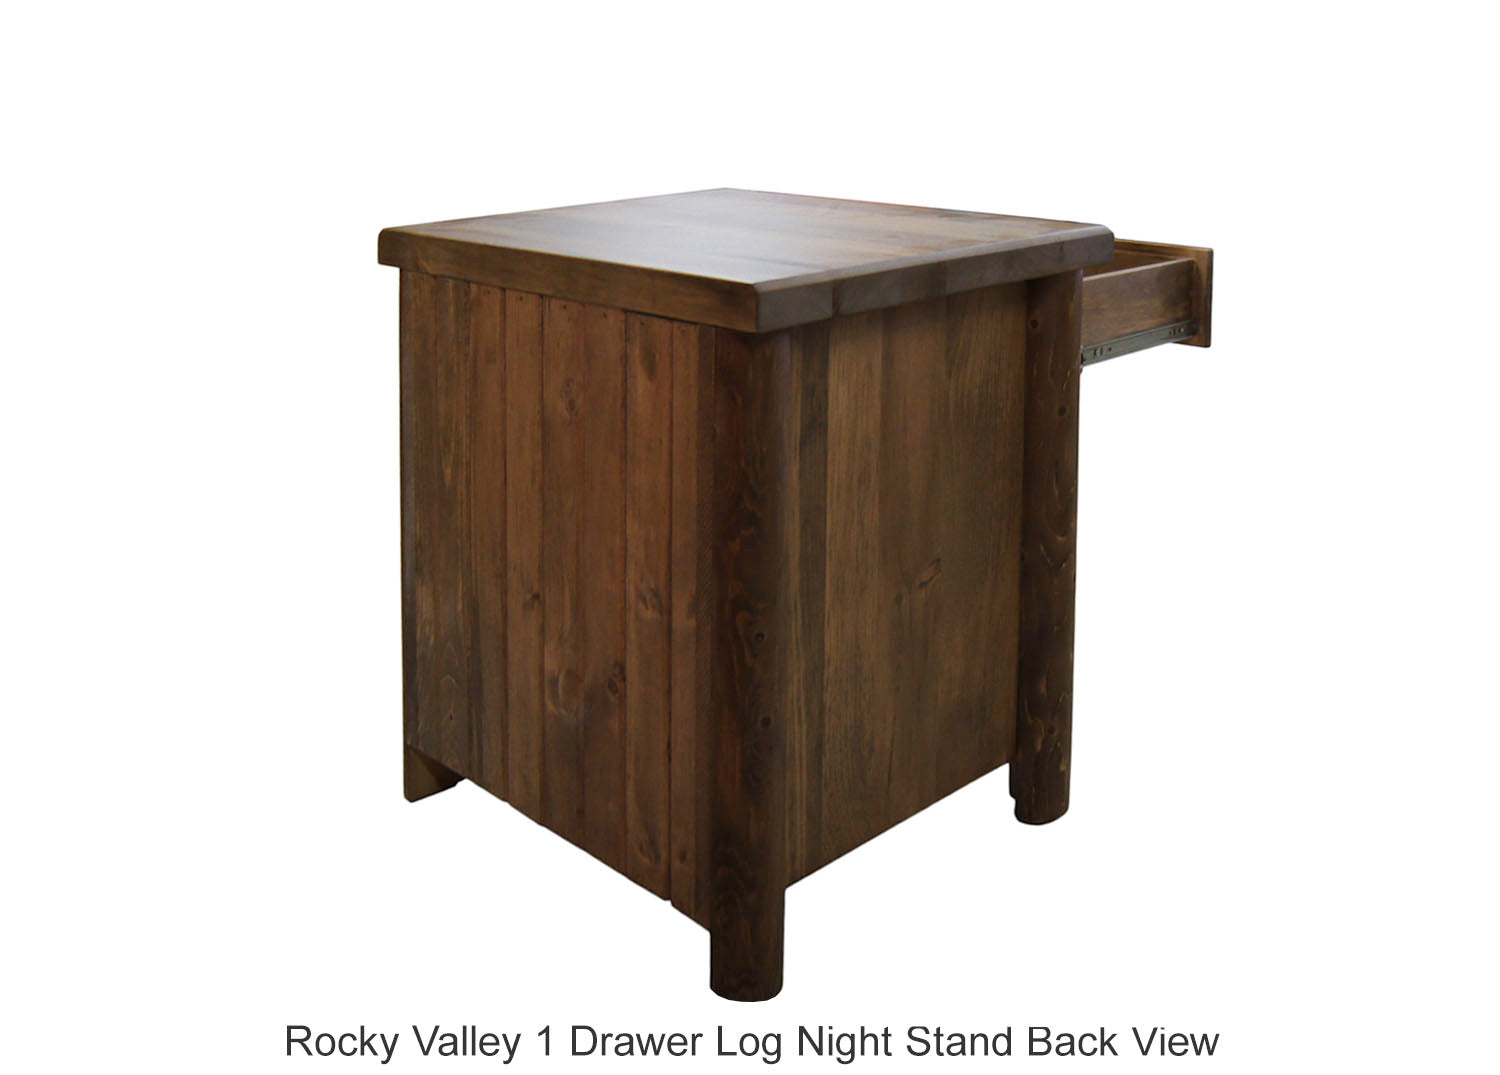 Rocky Valley 1 Drawer Log Night Stand Back View